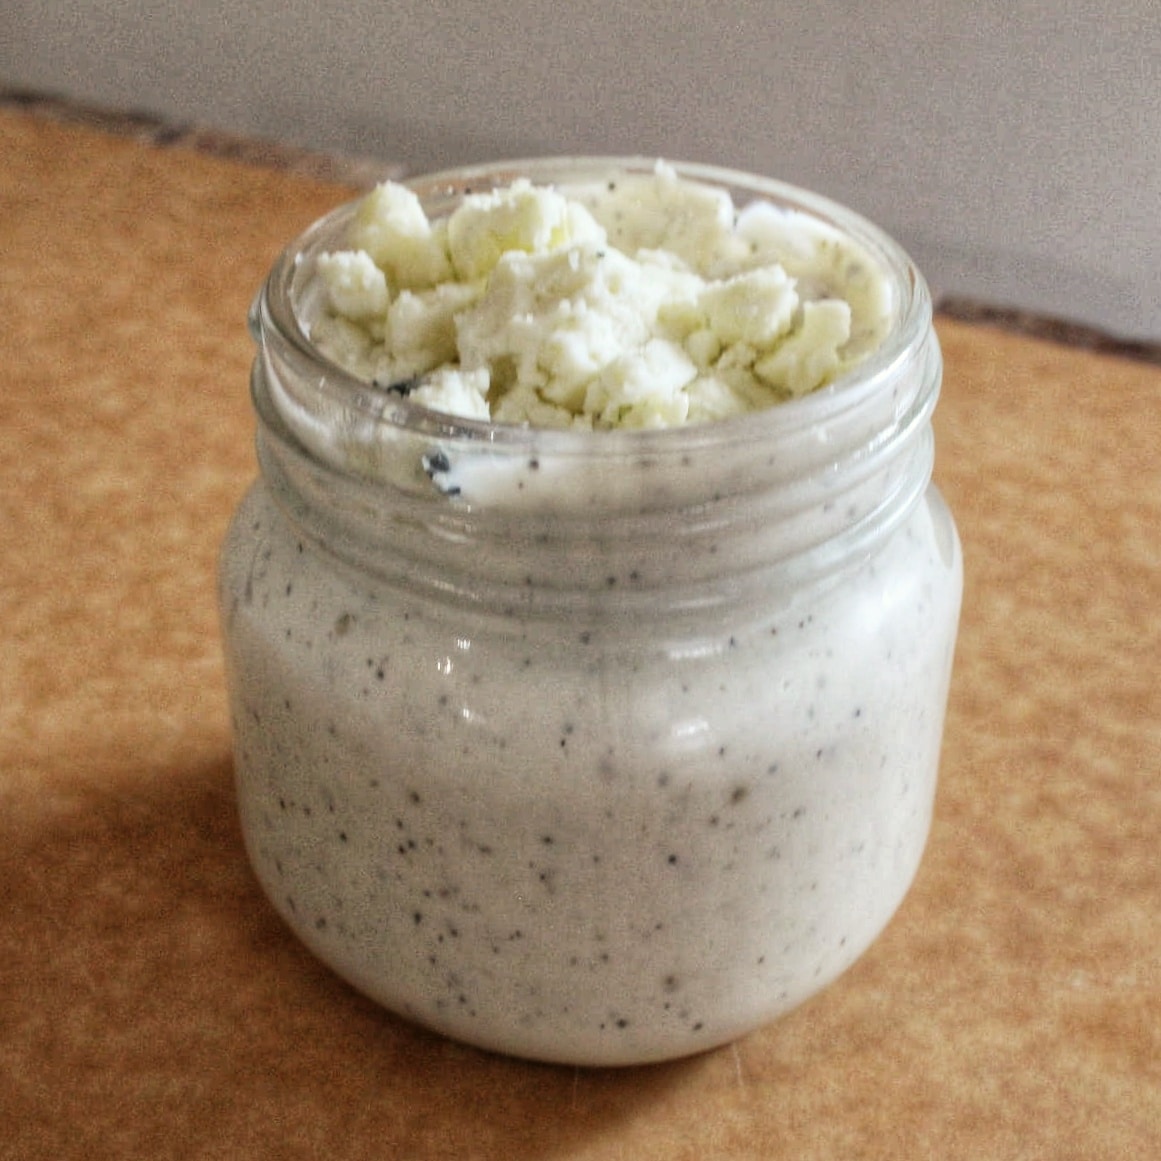 Blue cheese dressing recipe by Cleveland cooking. A mason jar filled with blue cheese dressing with pieces of blue cheese on top.